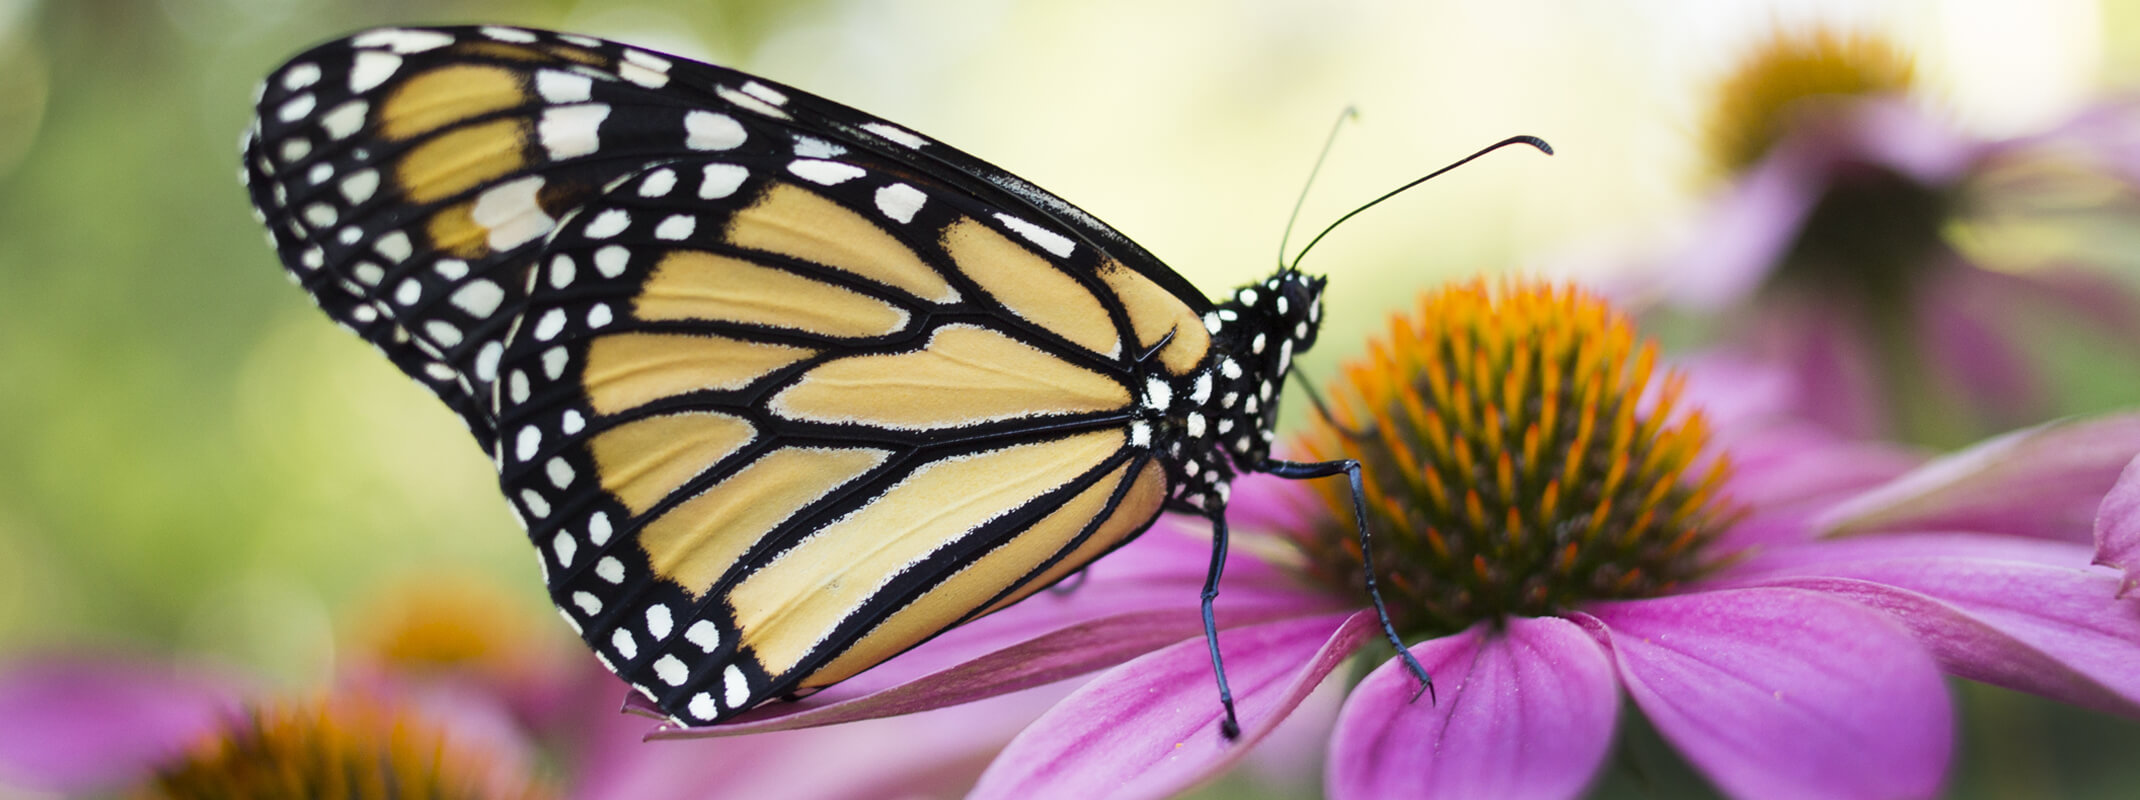 Monarch butterfly sitting on a cone flower